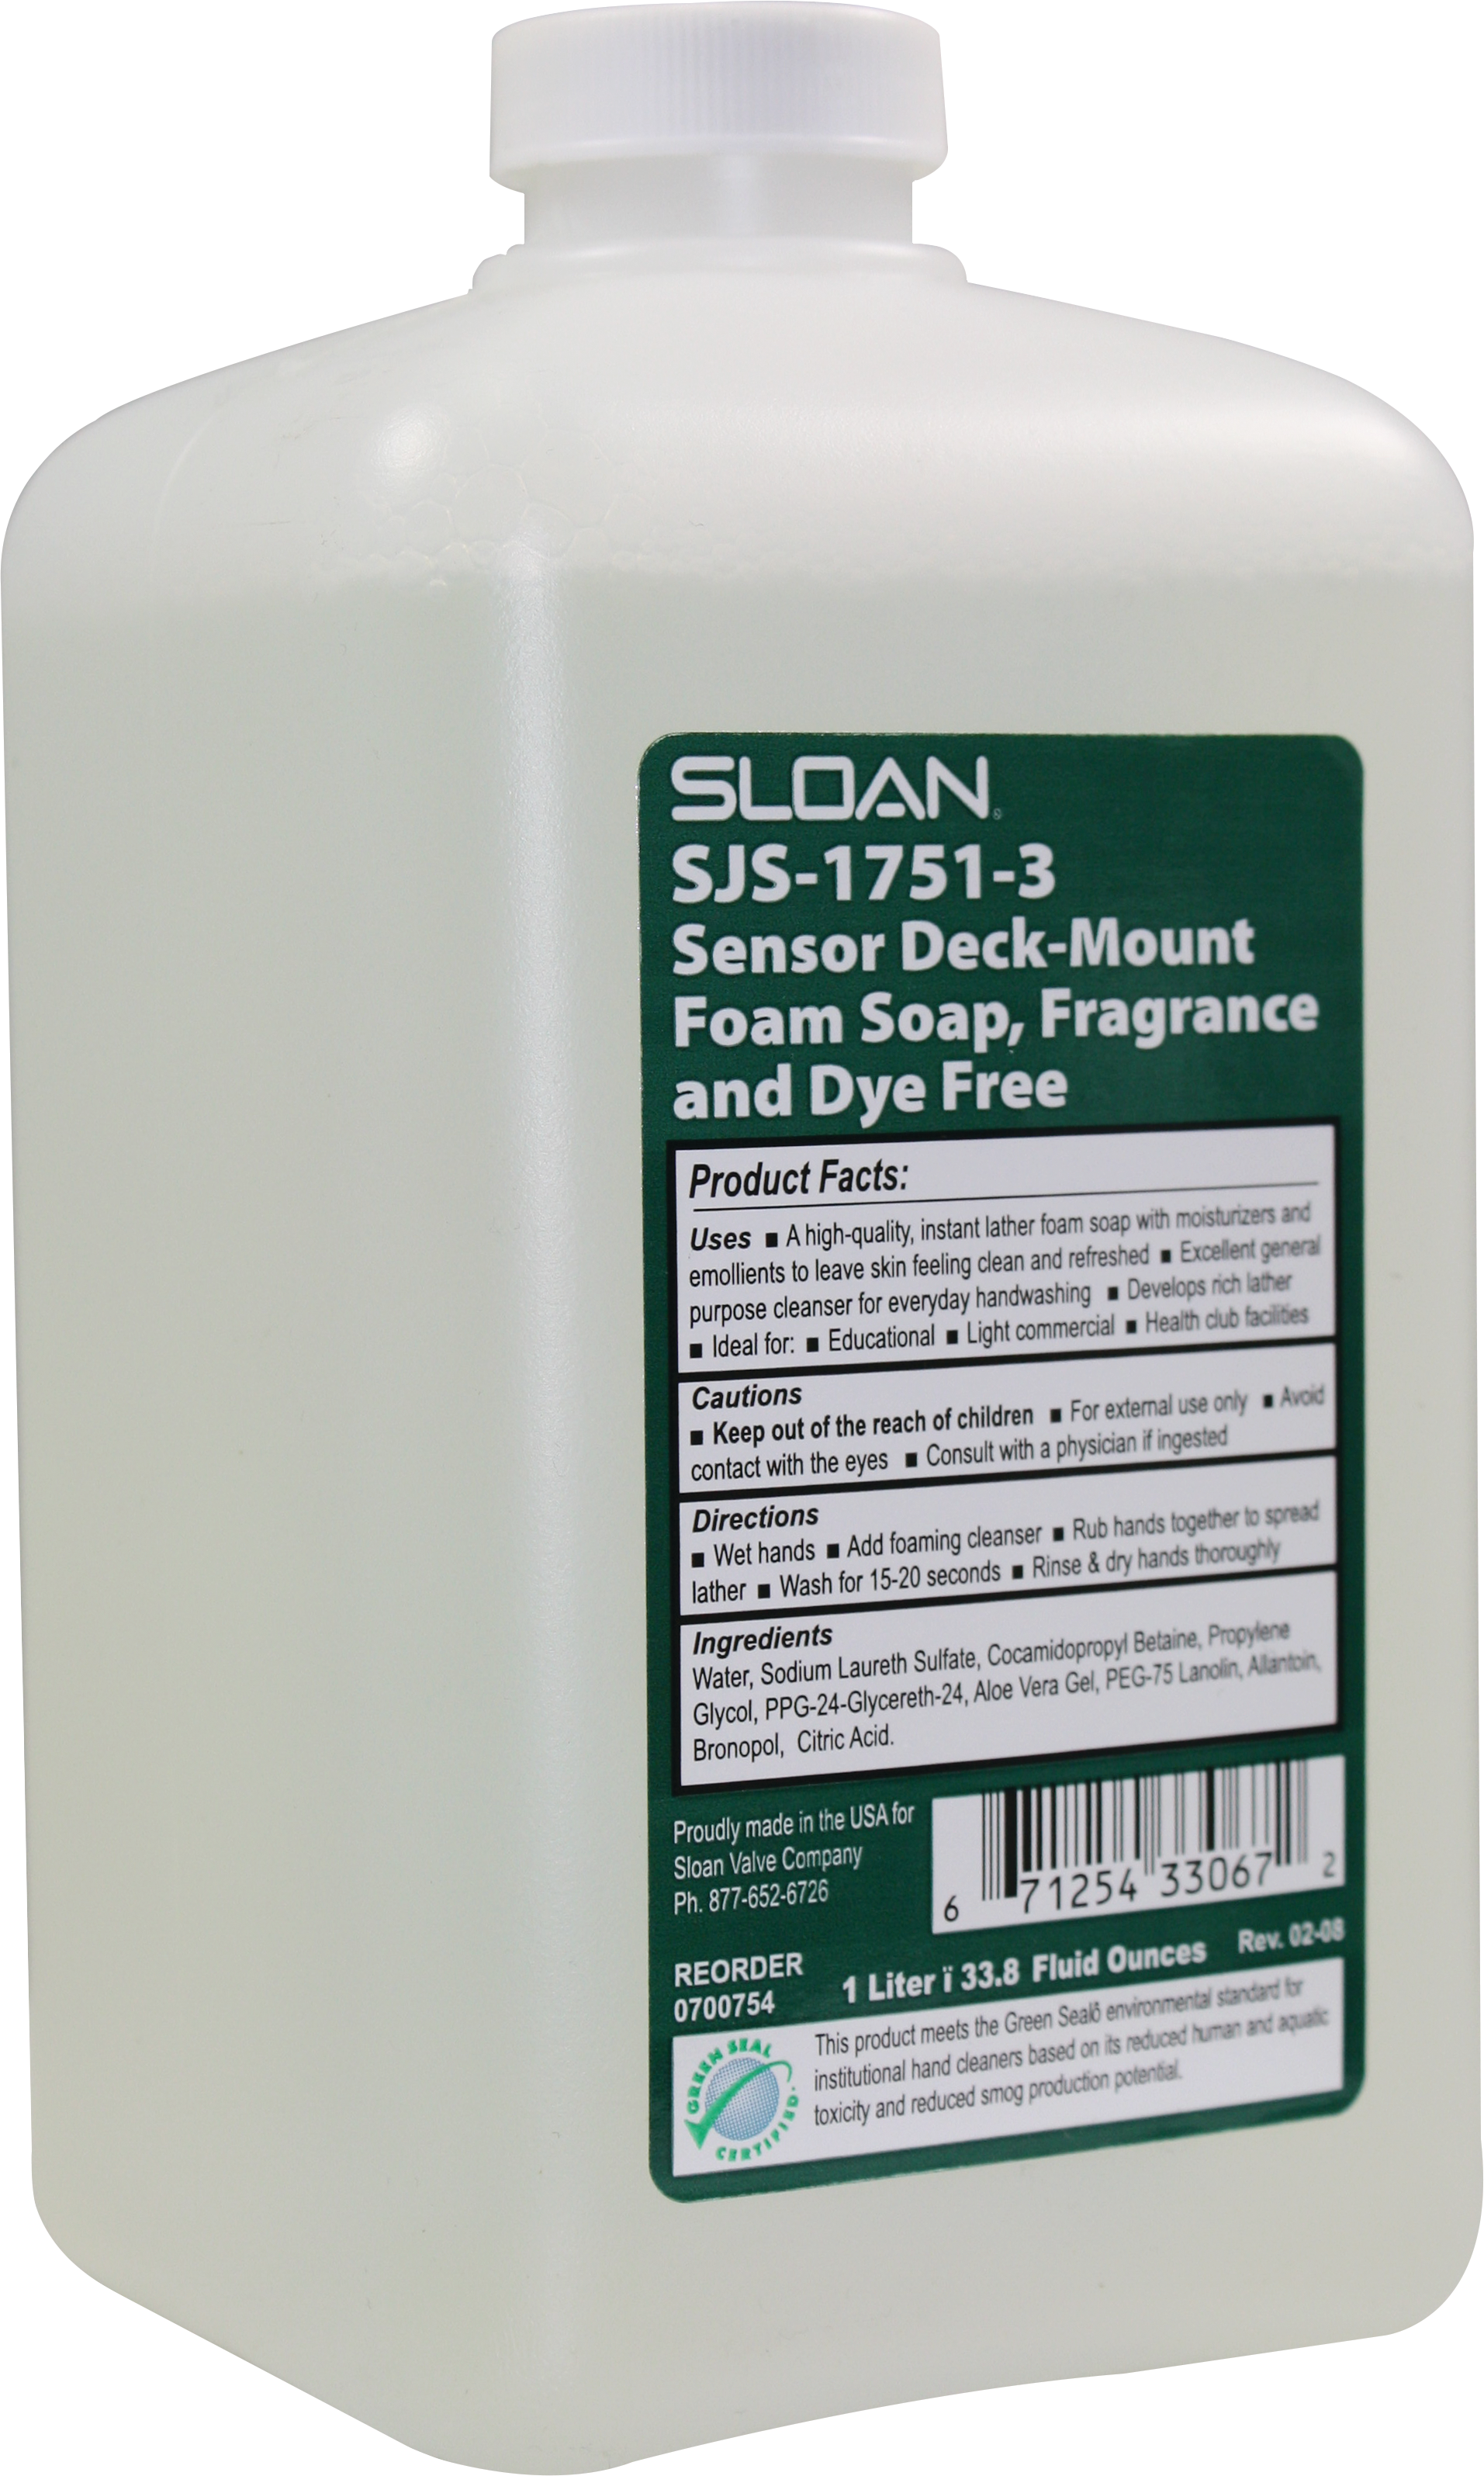 Buy Institutional Hand Soap - Green Foaming Soap Hand Wash Soap